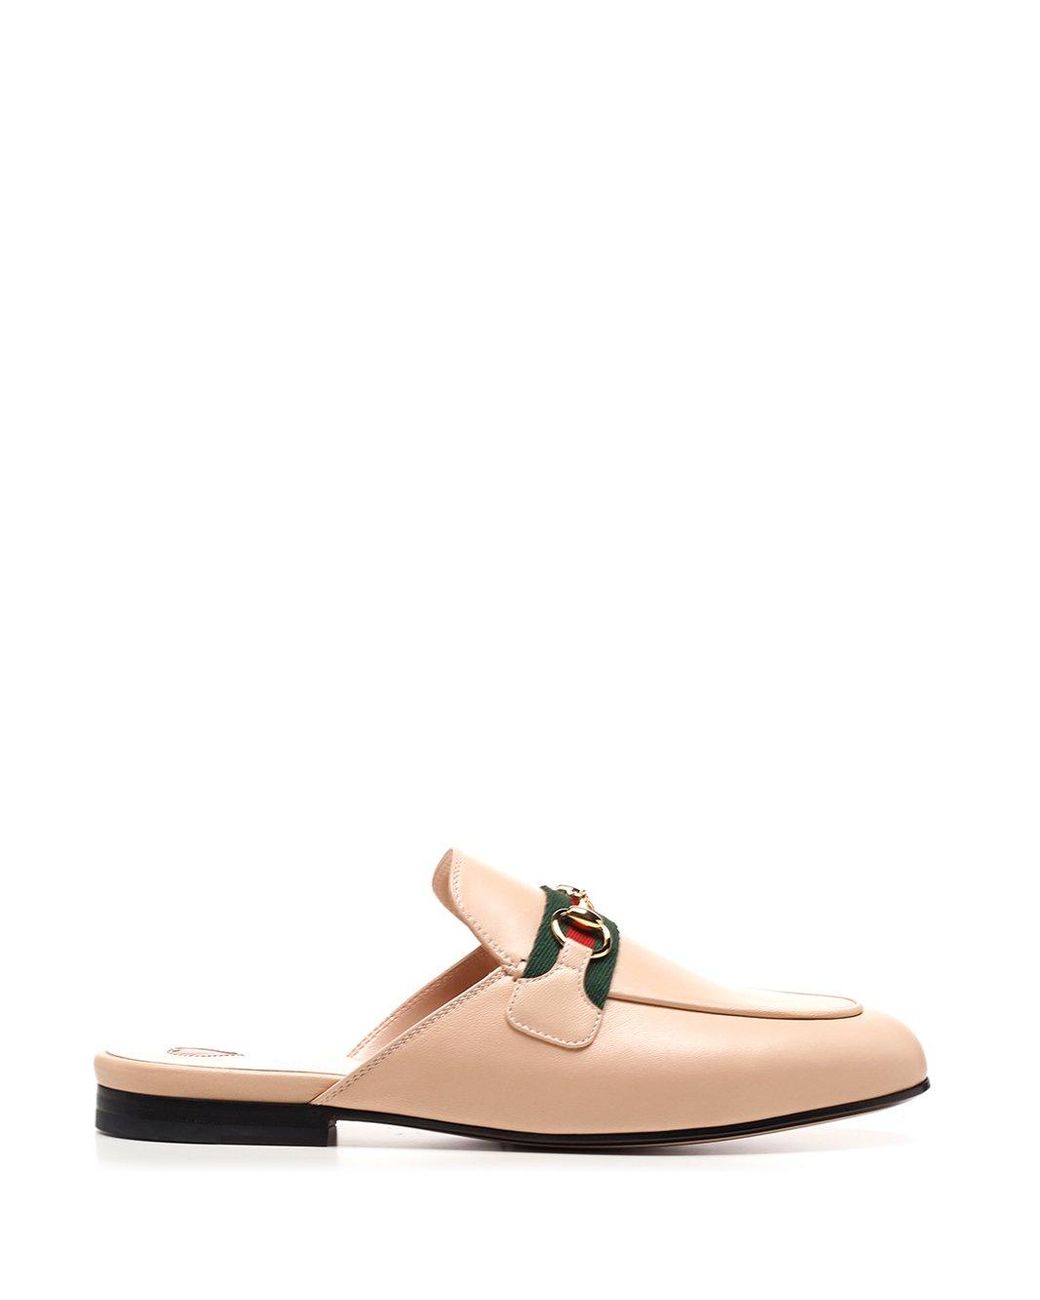 Gucci Princetown Leather Slipper in Natural | Lyst